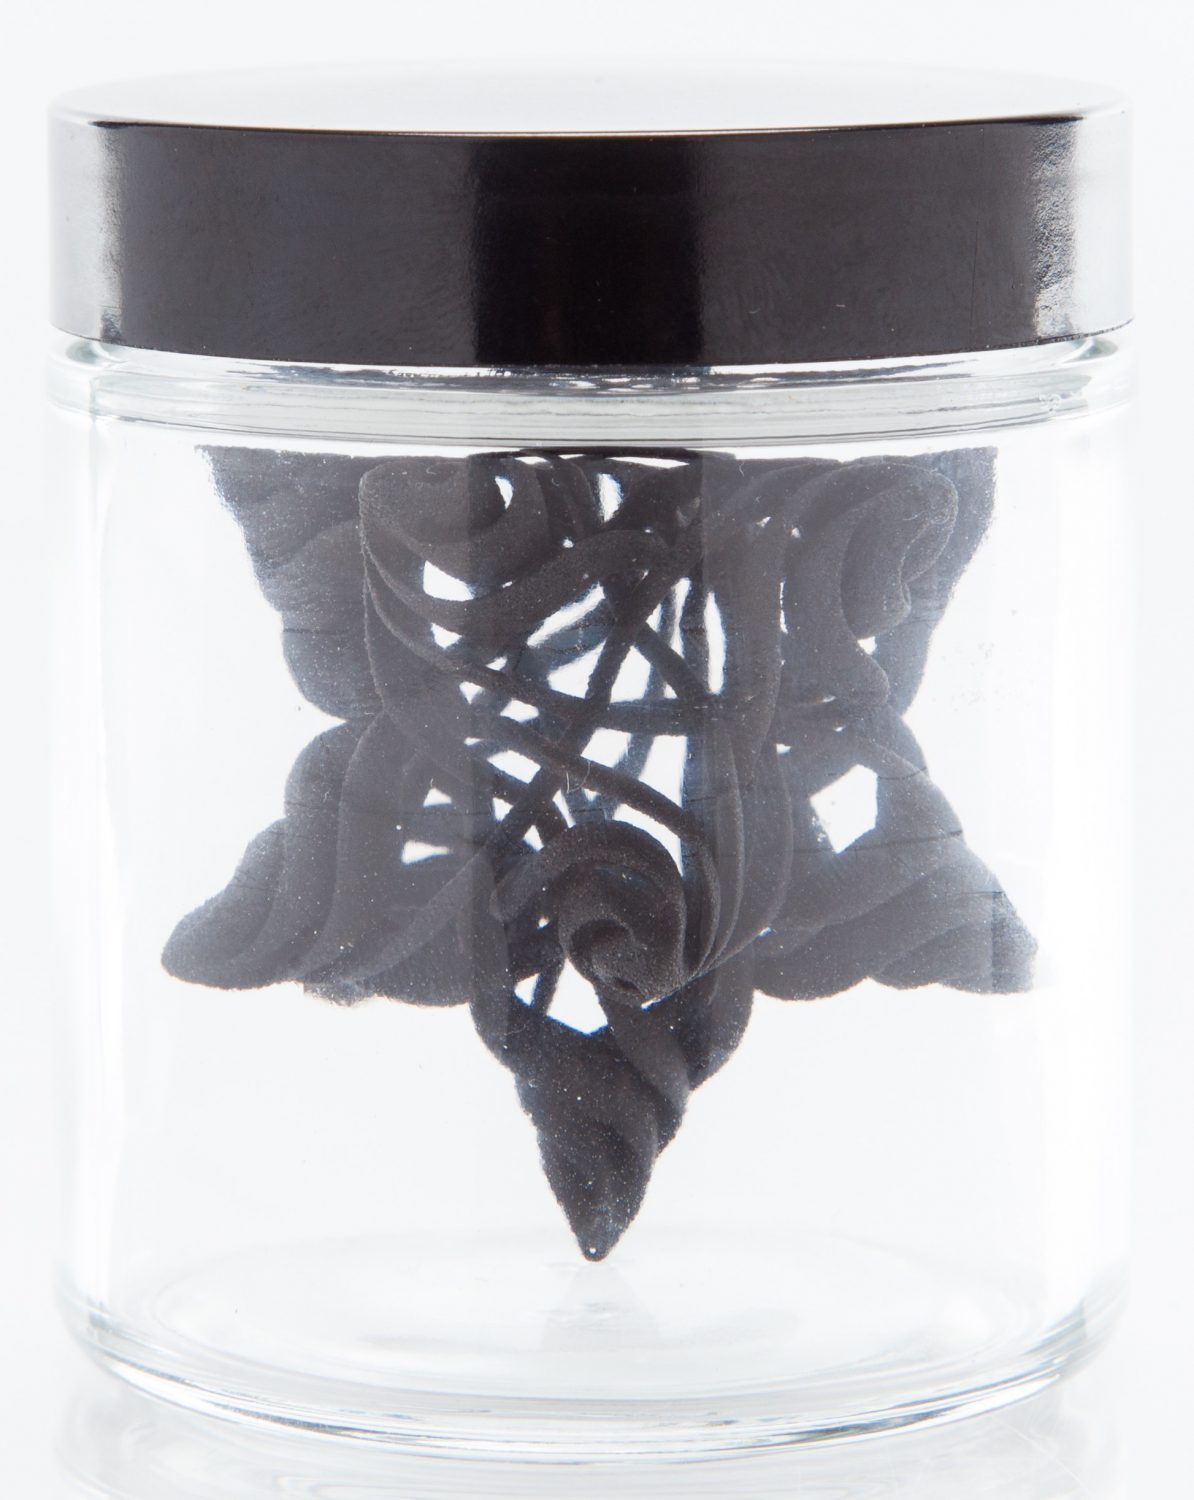 3D-printed geometric design in a glass container (side view).